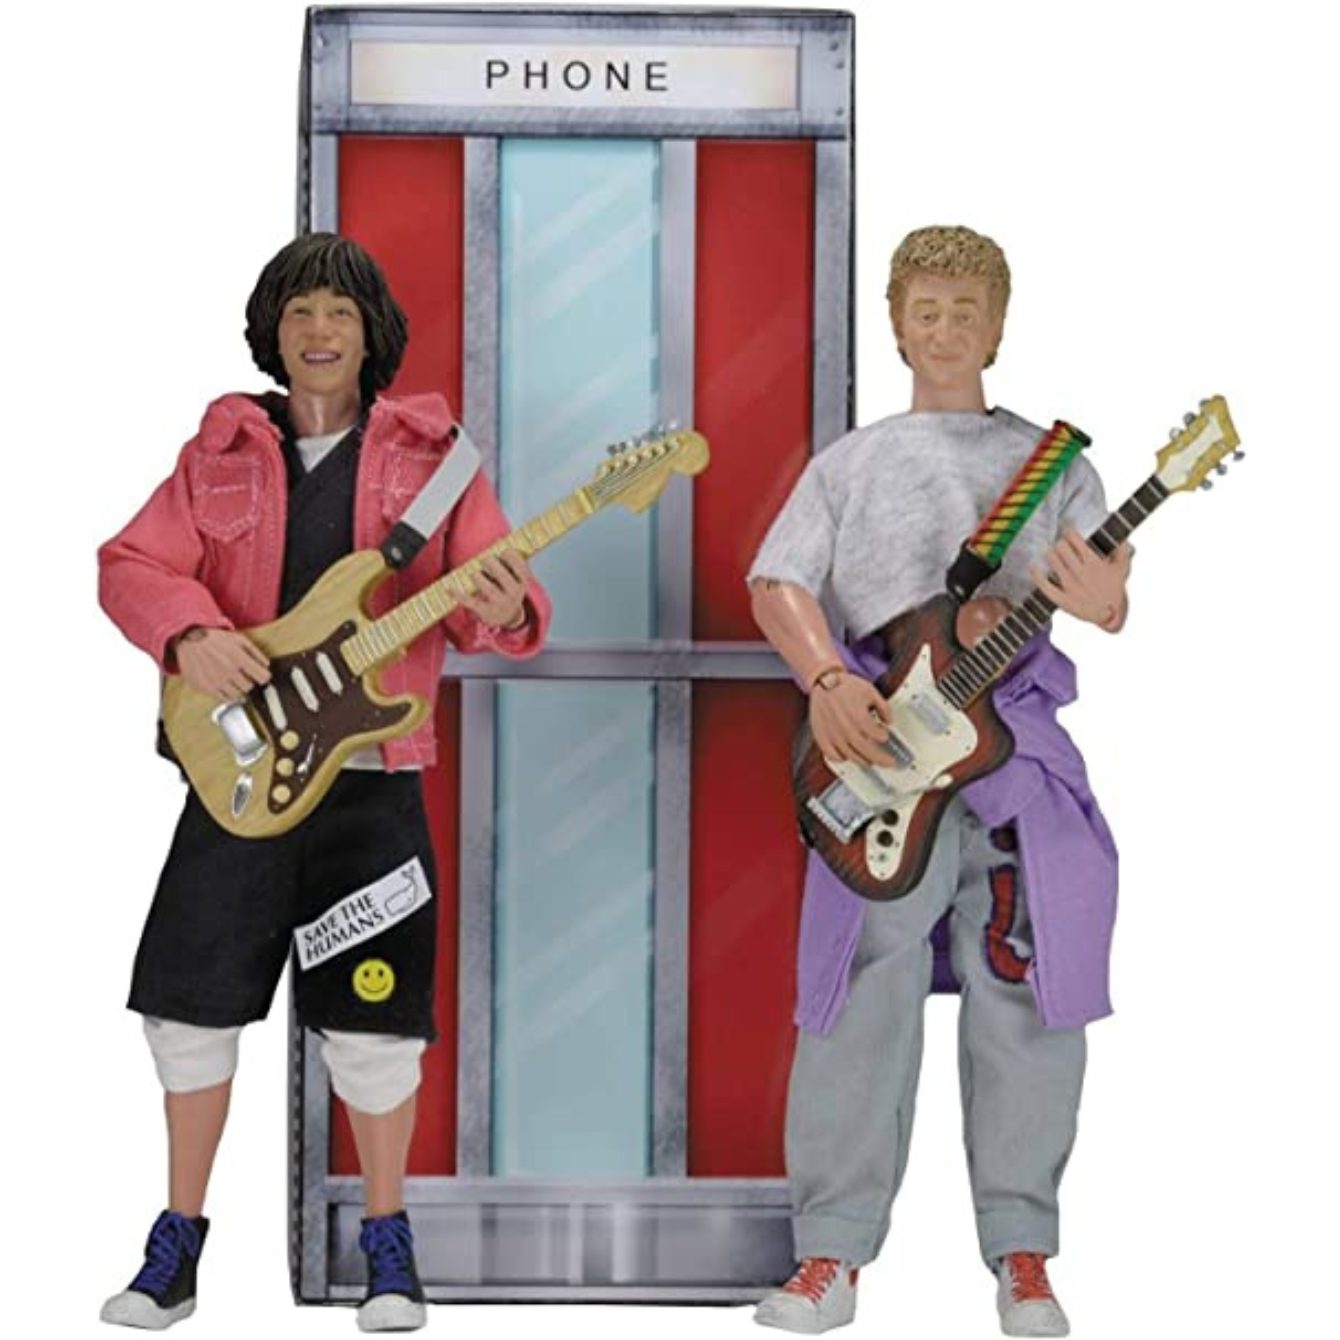 Bill & Ted's Excellent Adventure Bill & Ted Clothed Action Figures by Neca